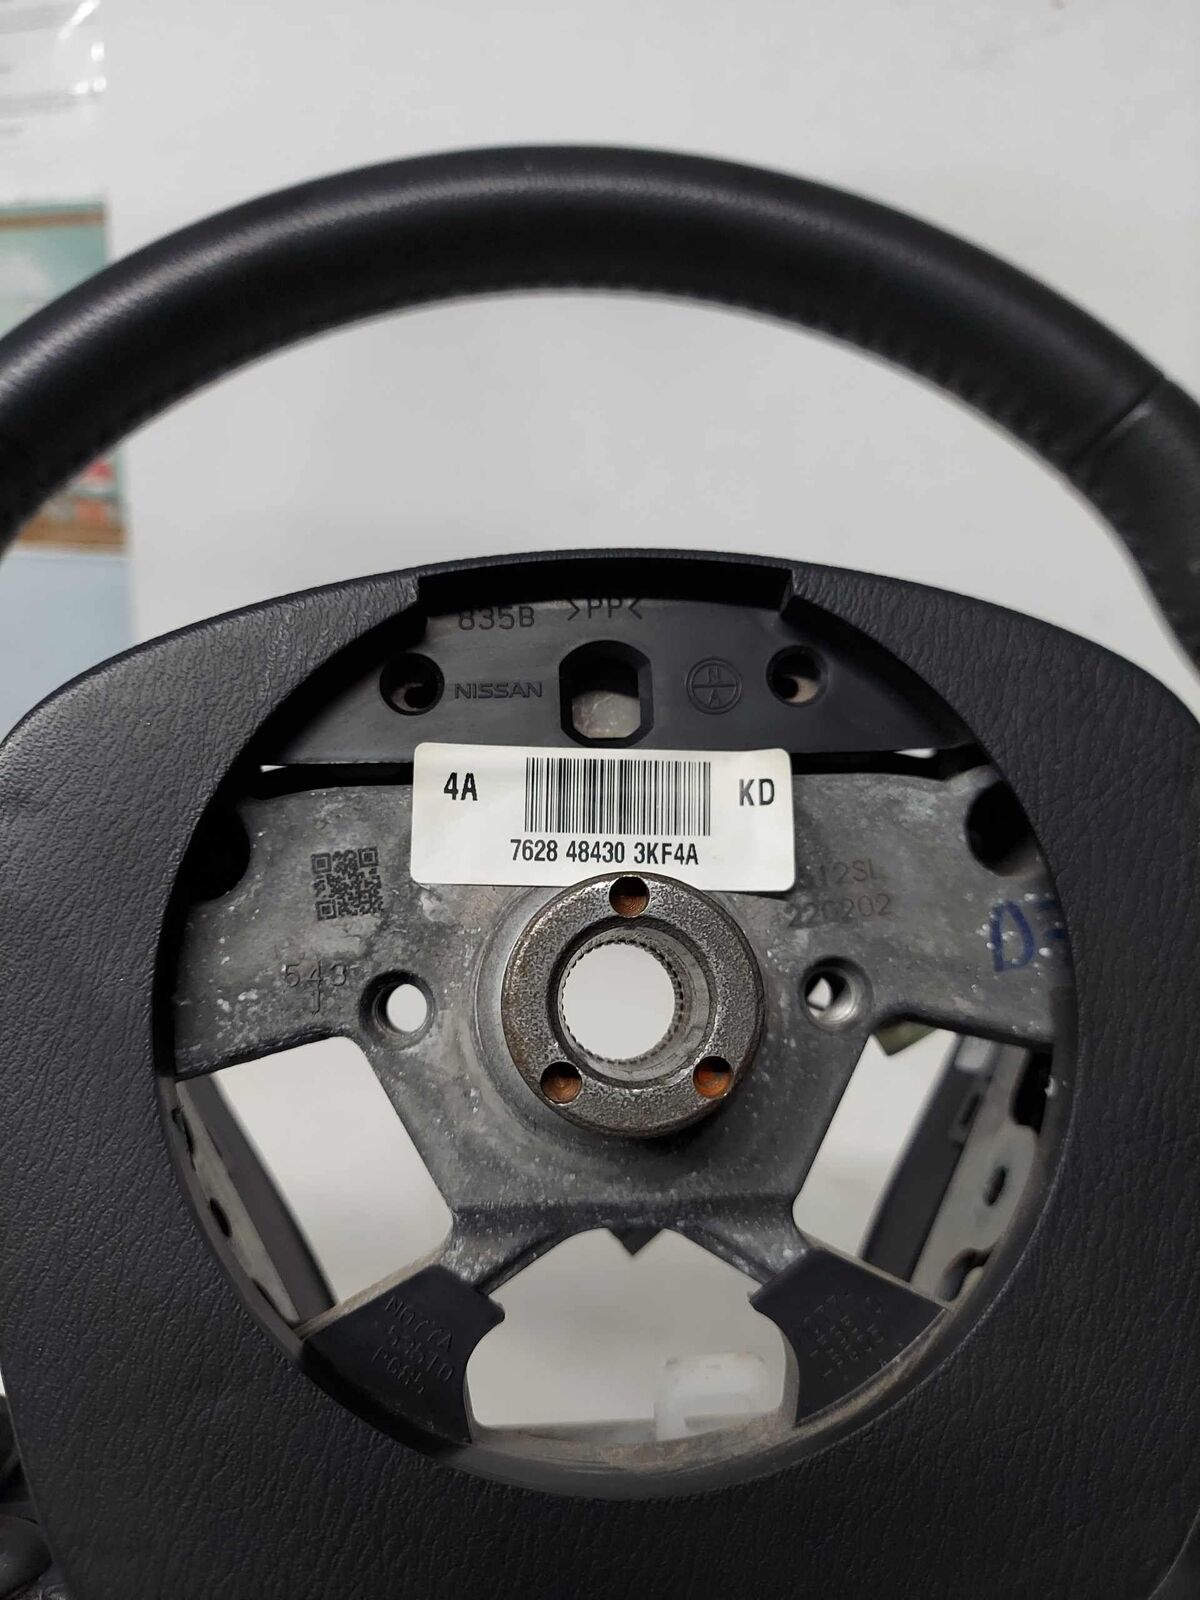 Steering Wheel with Audio Cruise Control Switch OEM NISSAN PATHFINDER 14 15 16